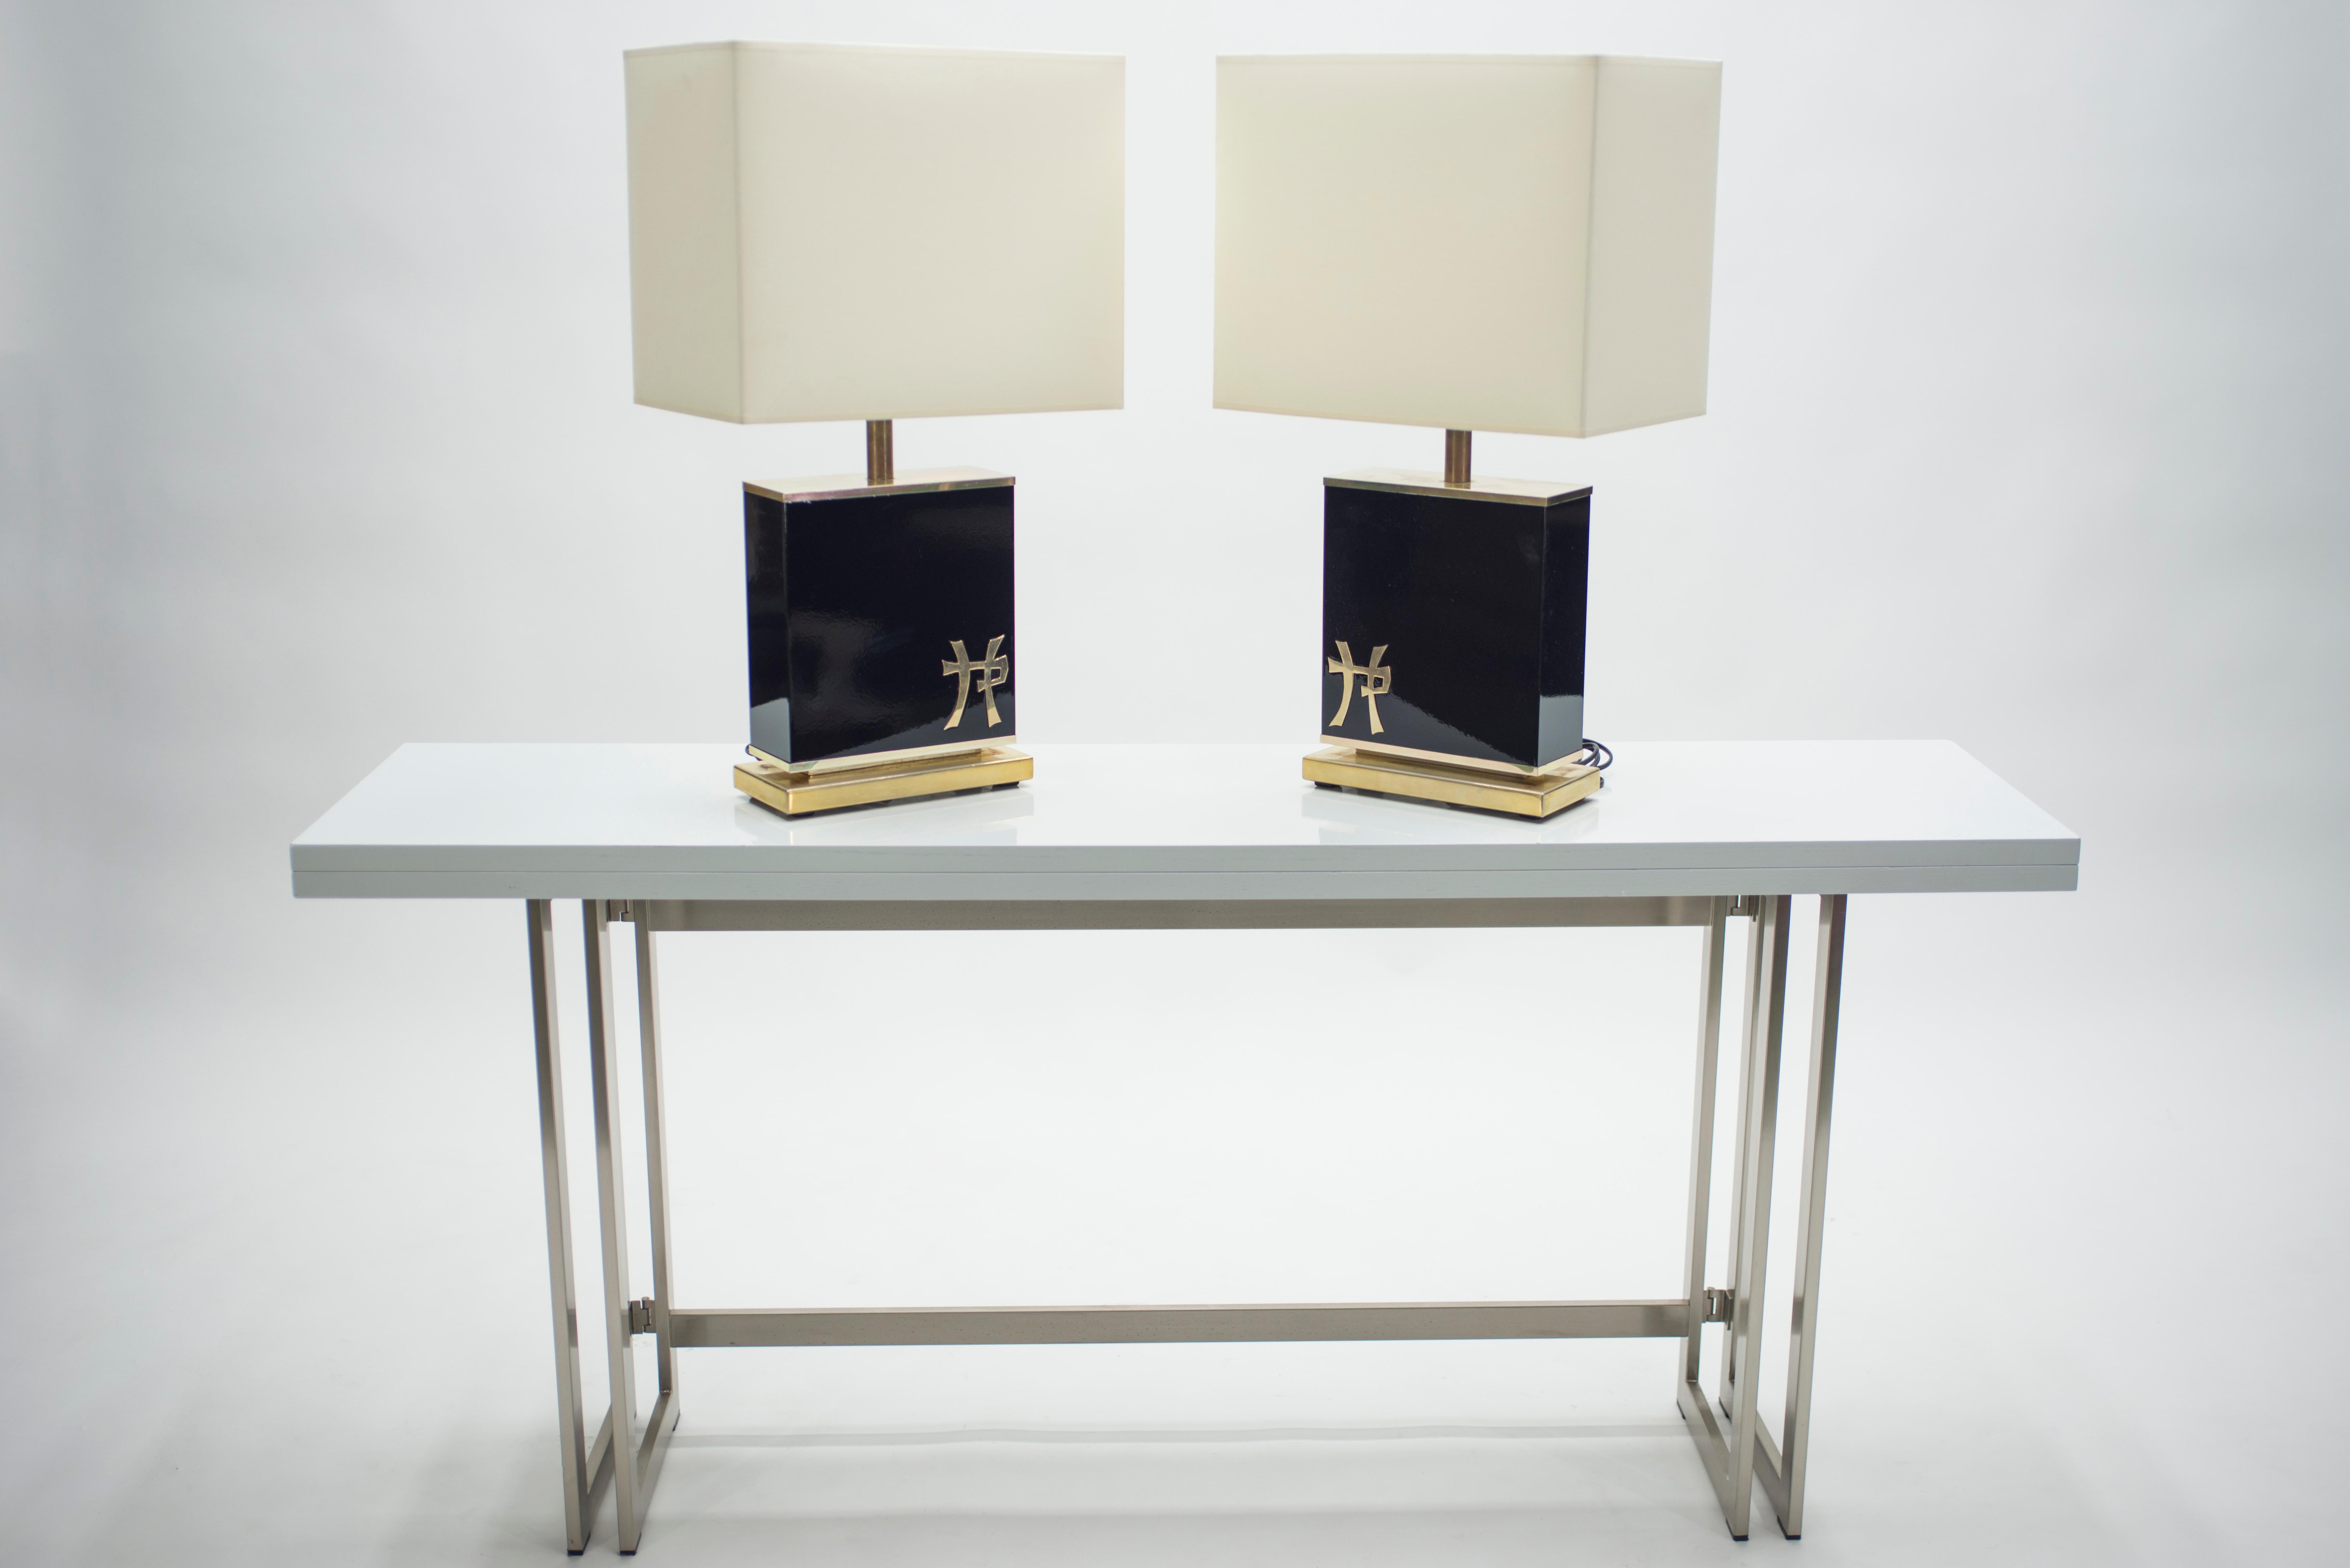 Pair of French J.C. Mahey Black Lacquer and Brass Table Lamps, 1970s For Sale 1